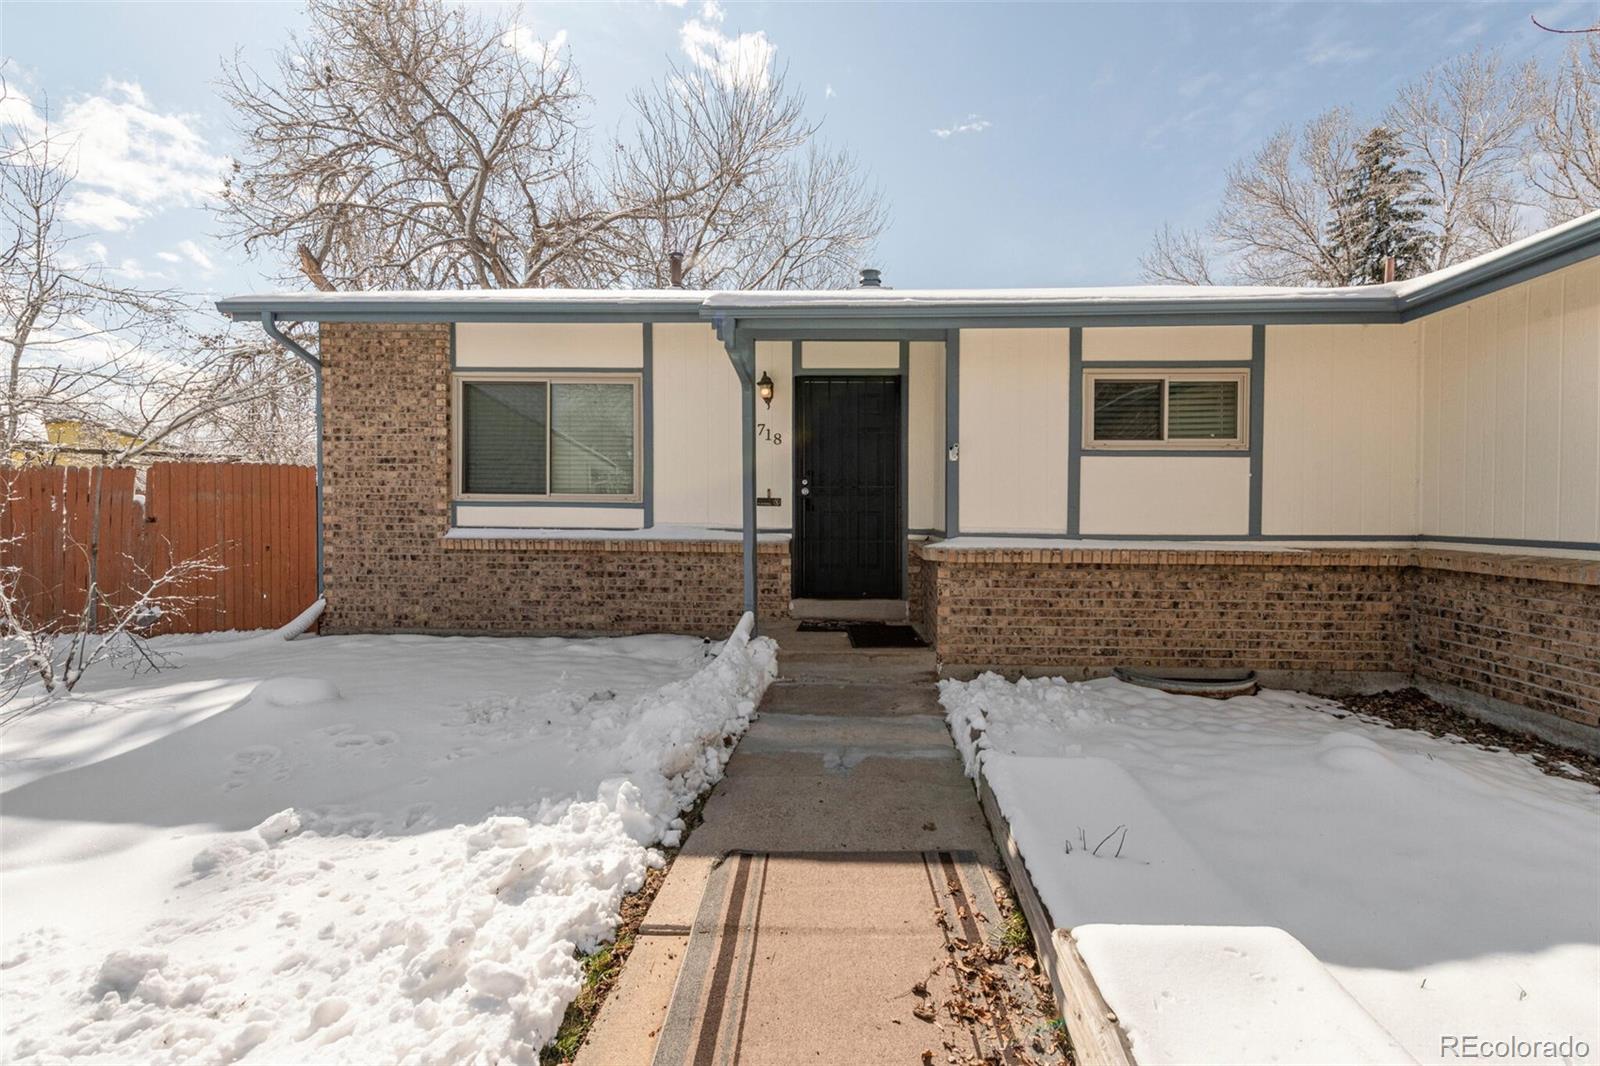 8718 w 86th avenue, arvada sold home. Closed on 2024-04-15 for $530,000.